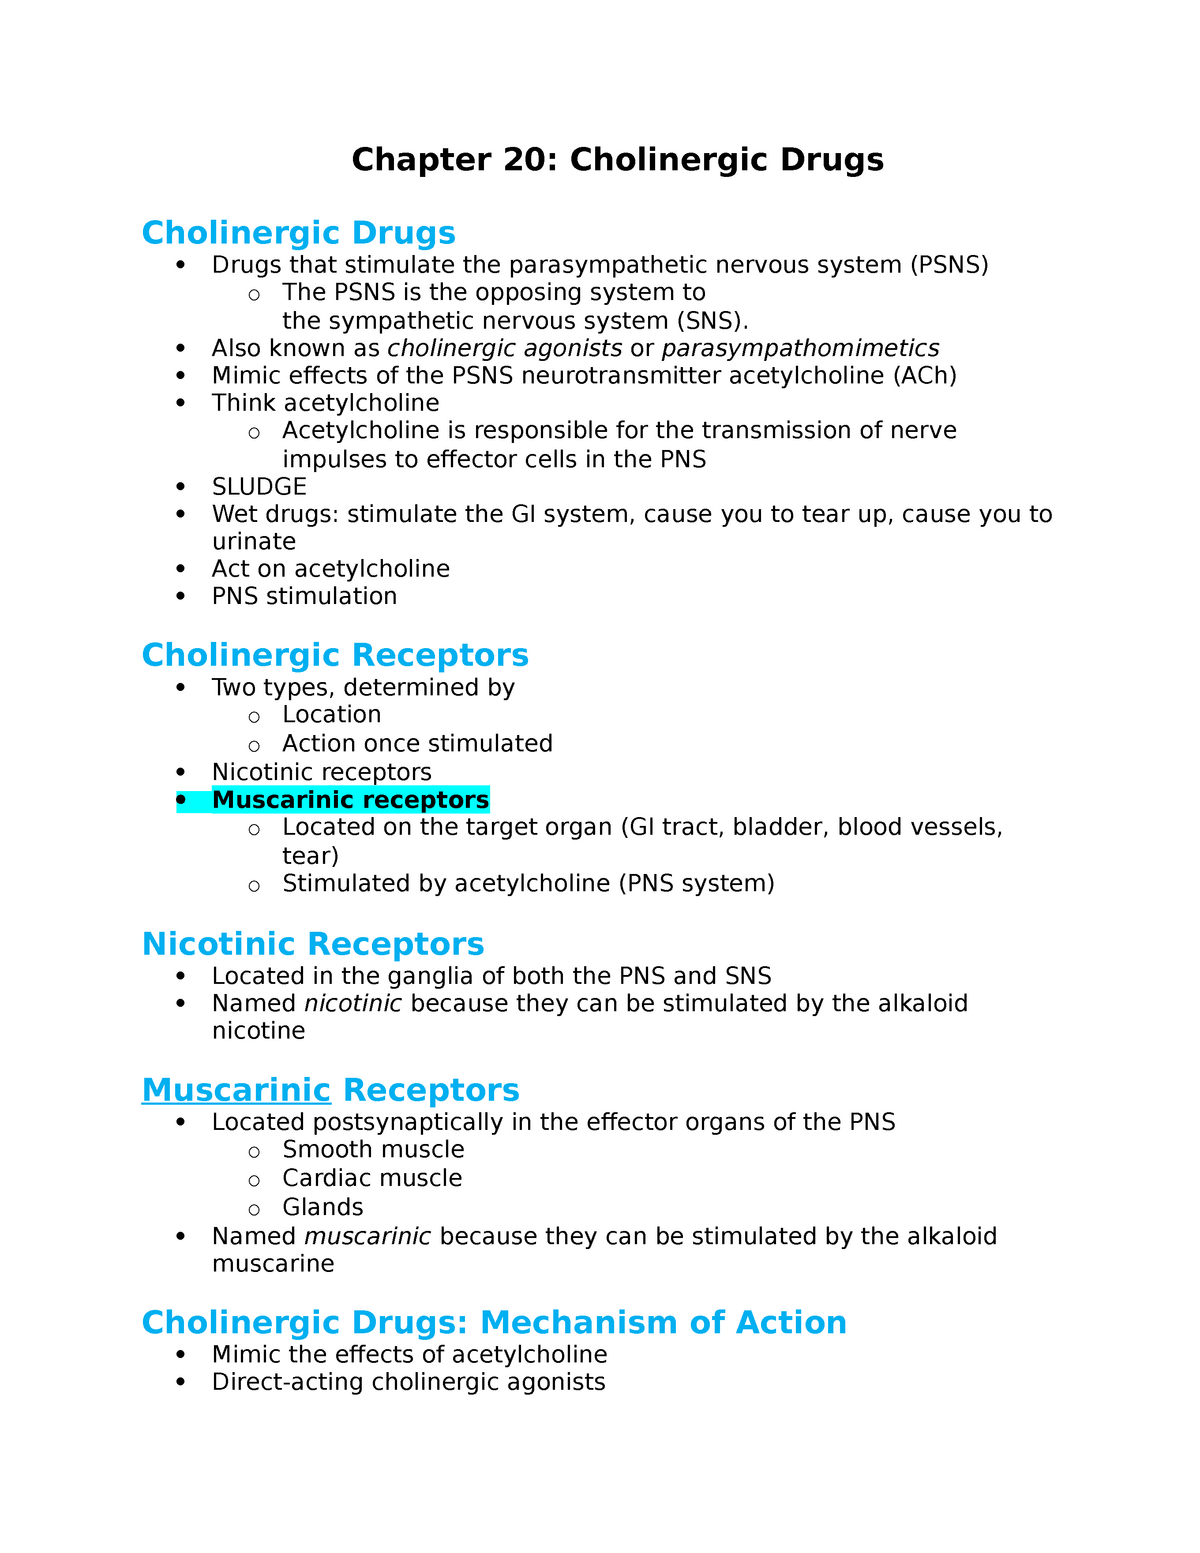 write an essay on cholinergic drugs